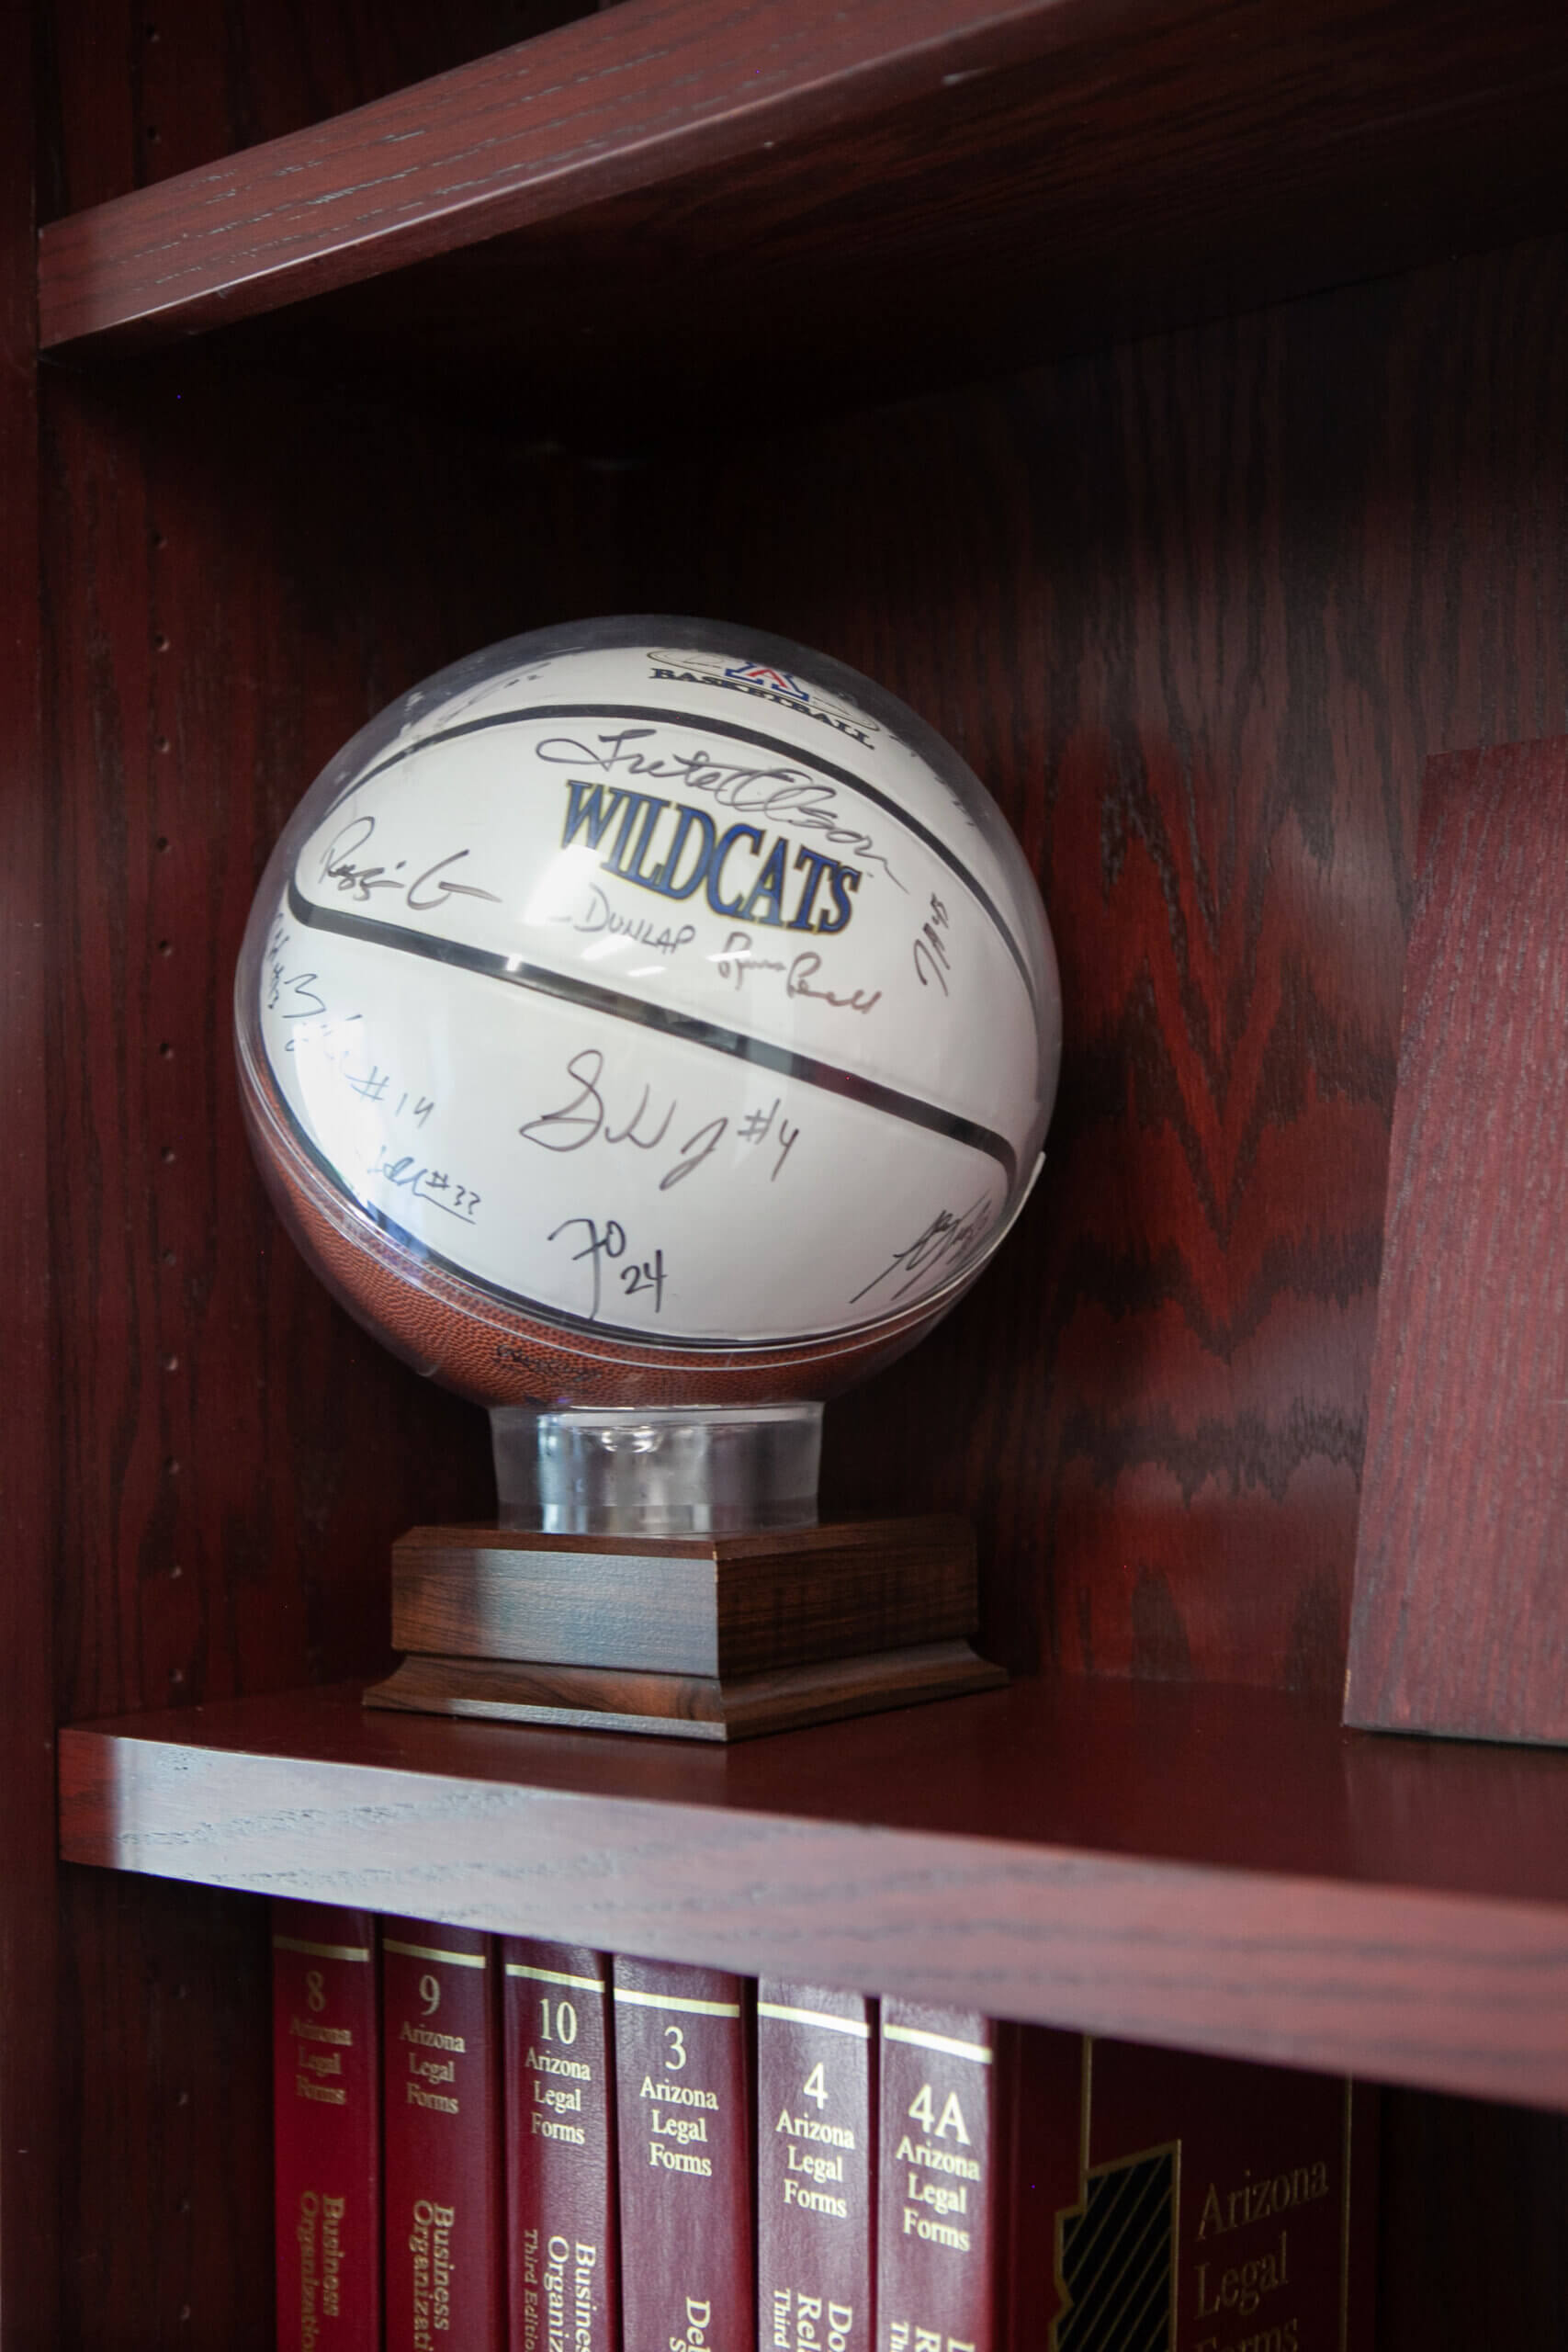 A signed basketball on a shelf above law books